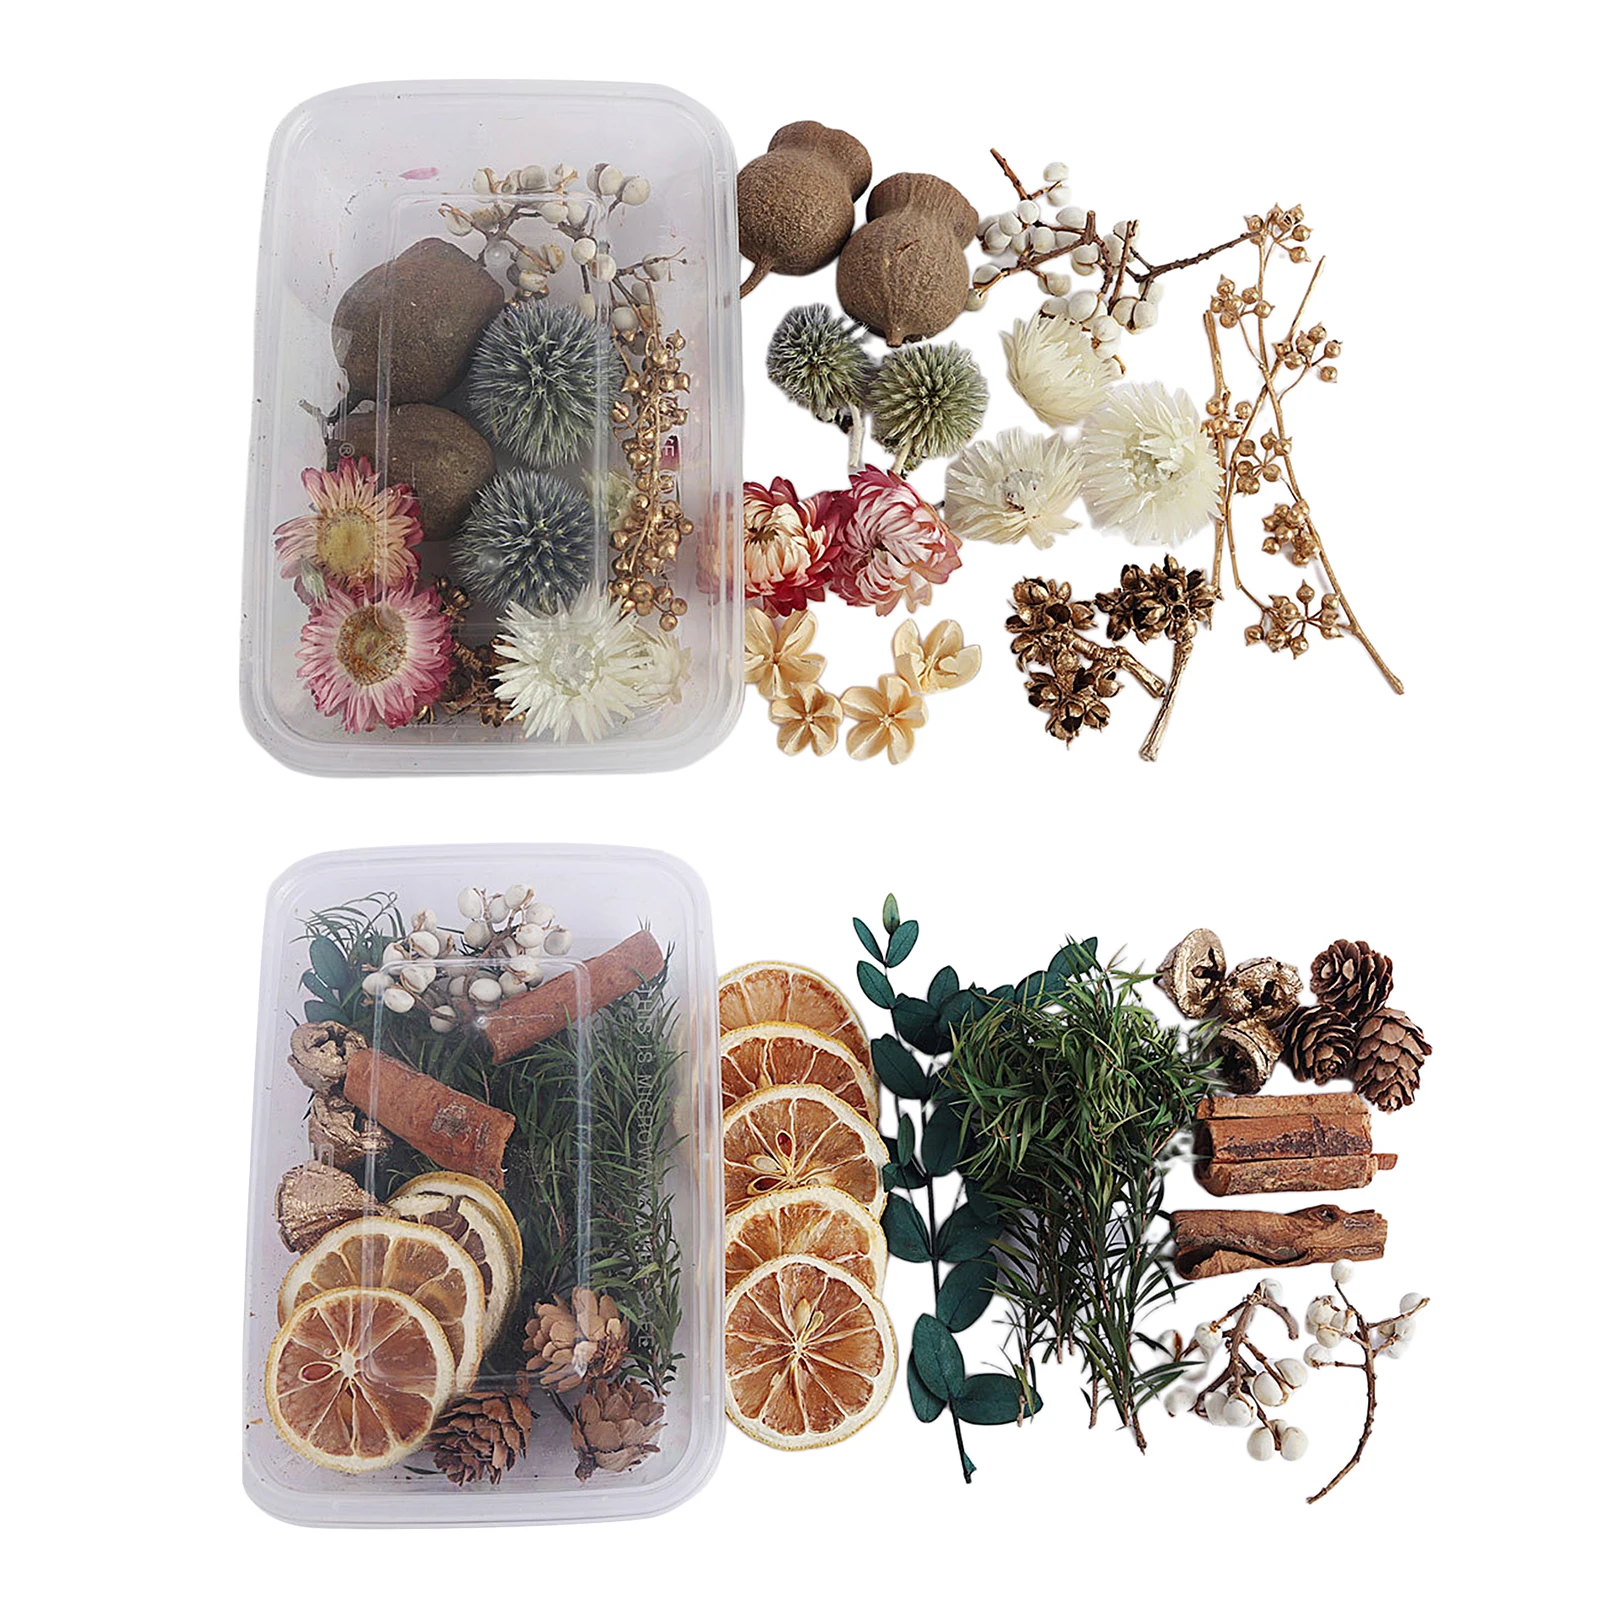 2 Boxes Real Natural Real Pressed Dried Flowers Petals Plants for Making Greeting Card, DIY Phone Case, Jewelry Craft